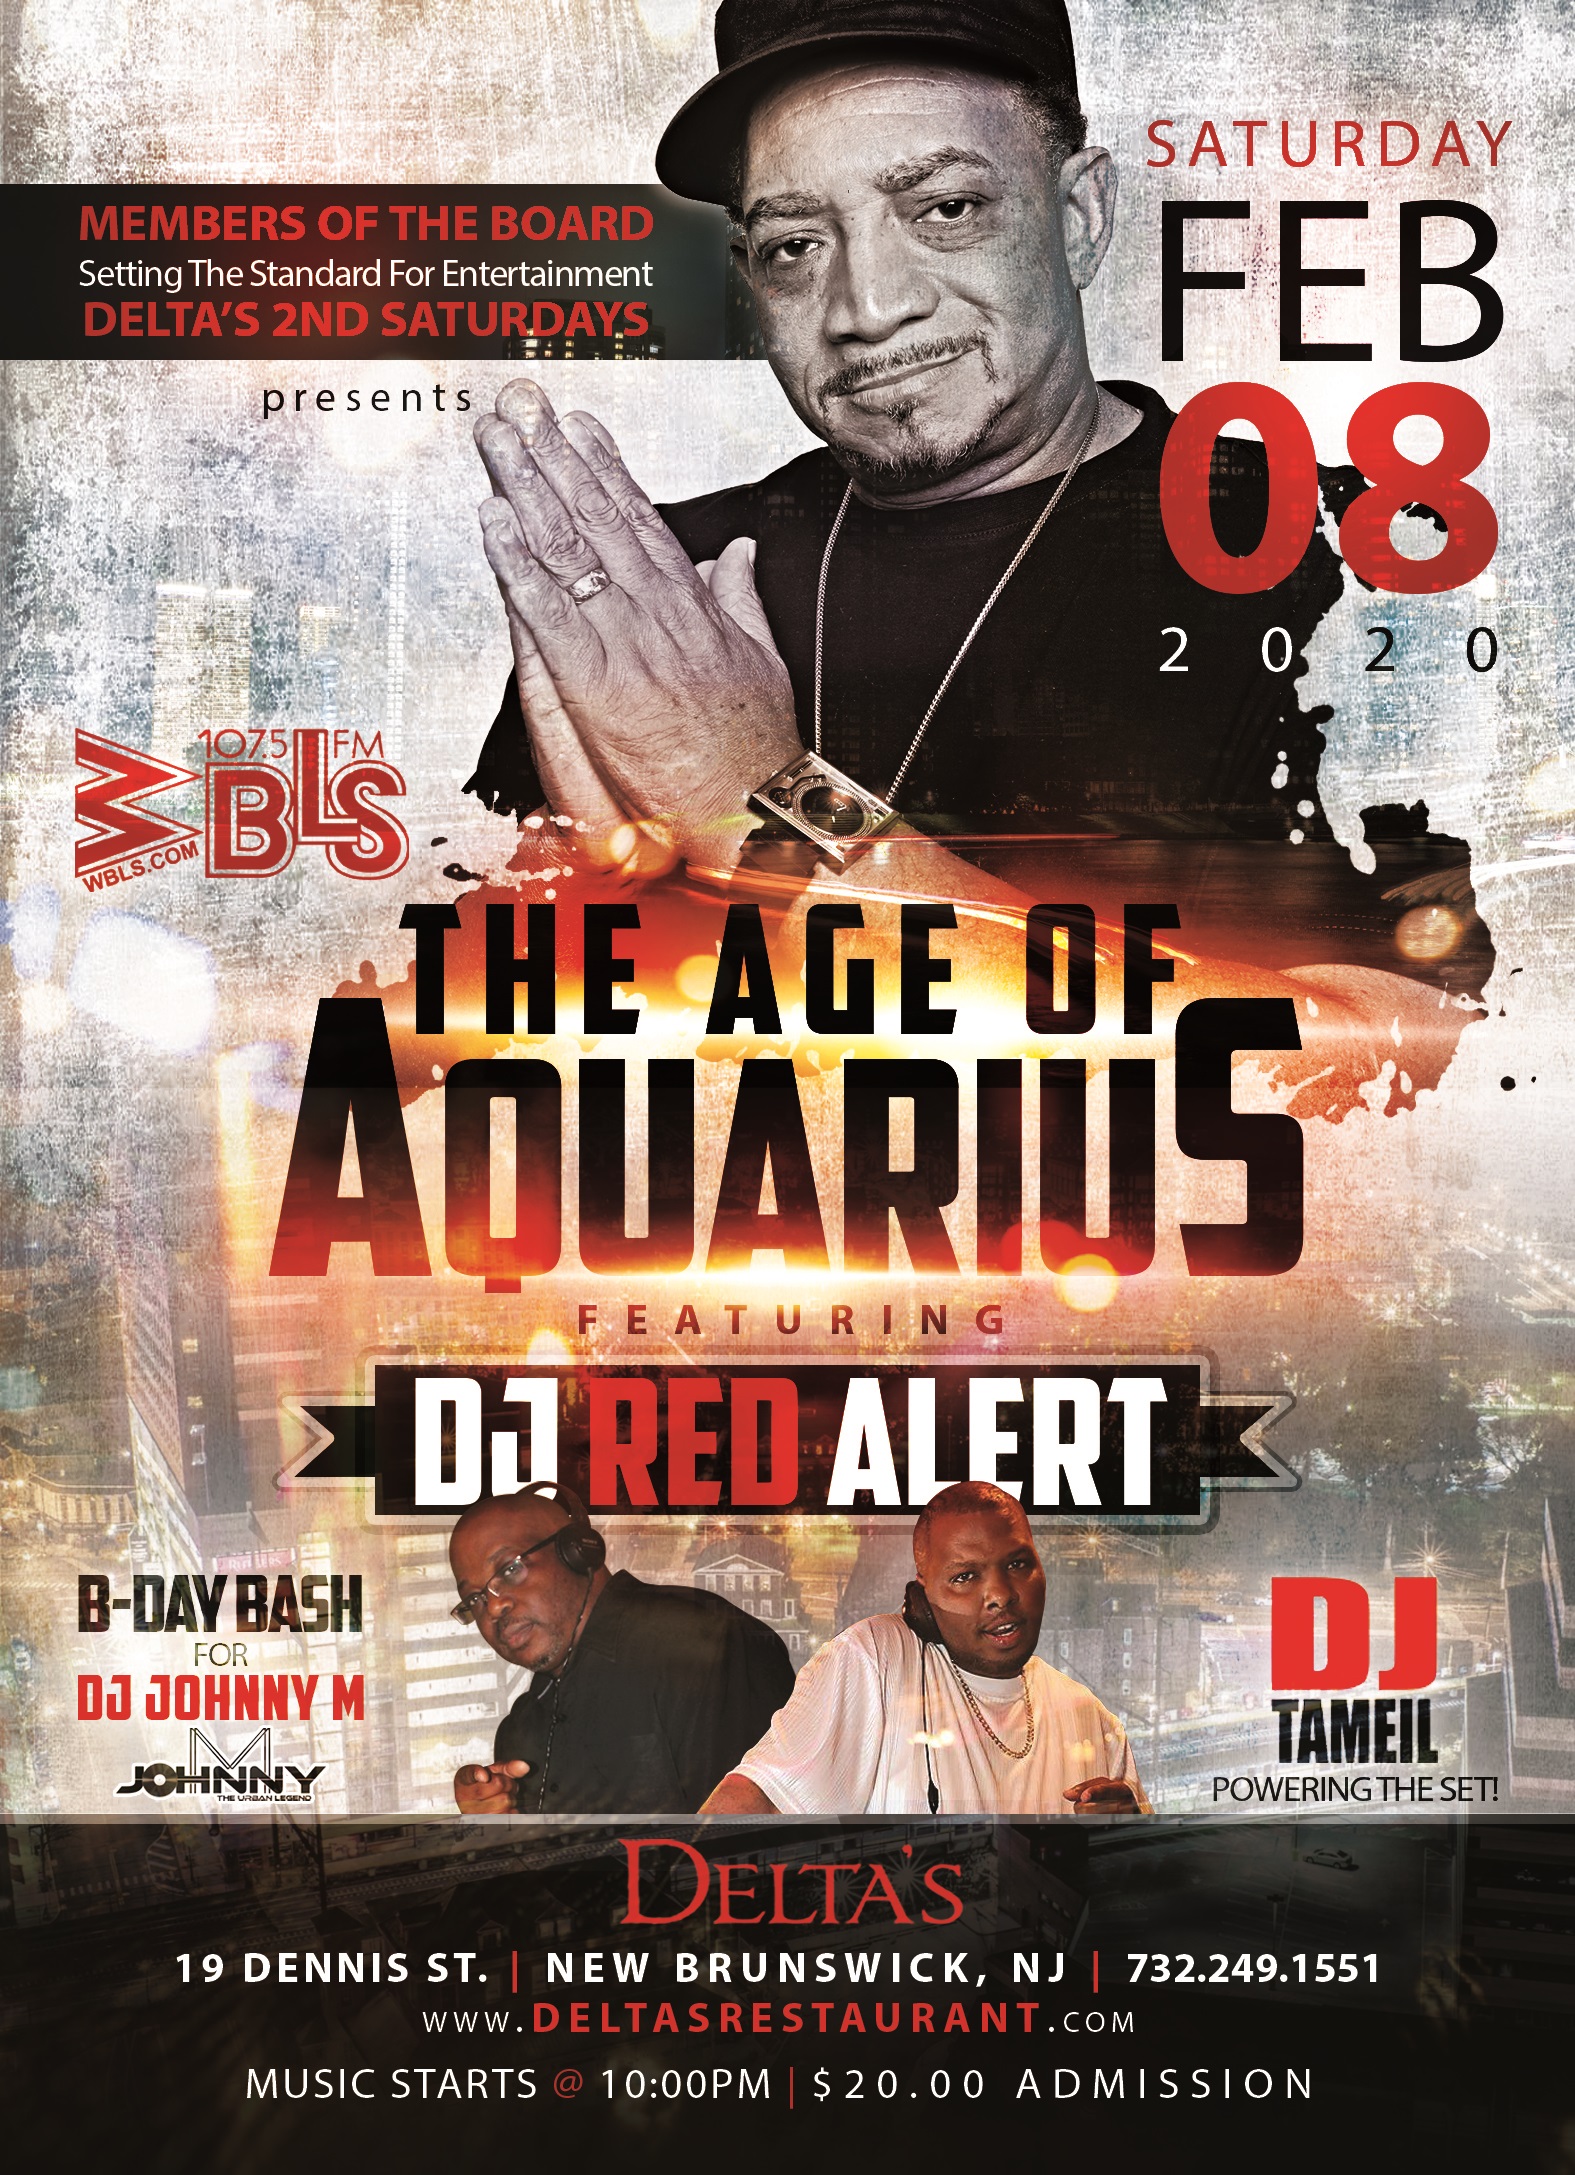 Aquarian B-Day Bash @ Delta's feat. DJ Red Alert - Early Bird Tickets <<These tickets DO NOT guarantee seating!>>